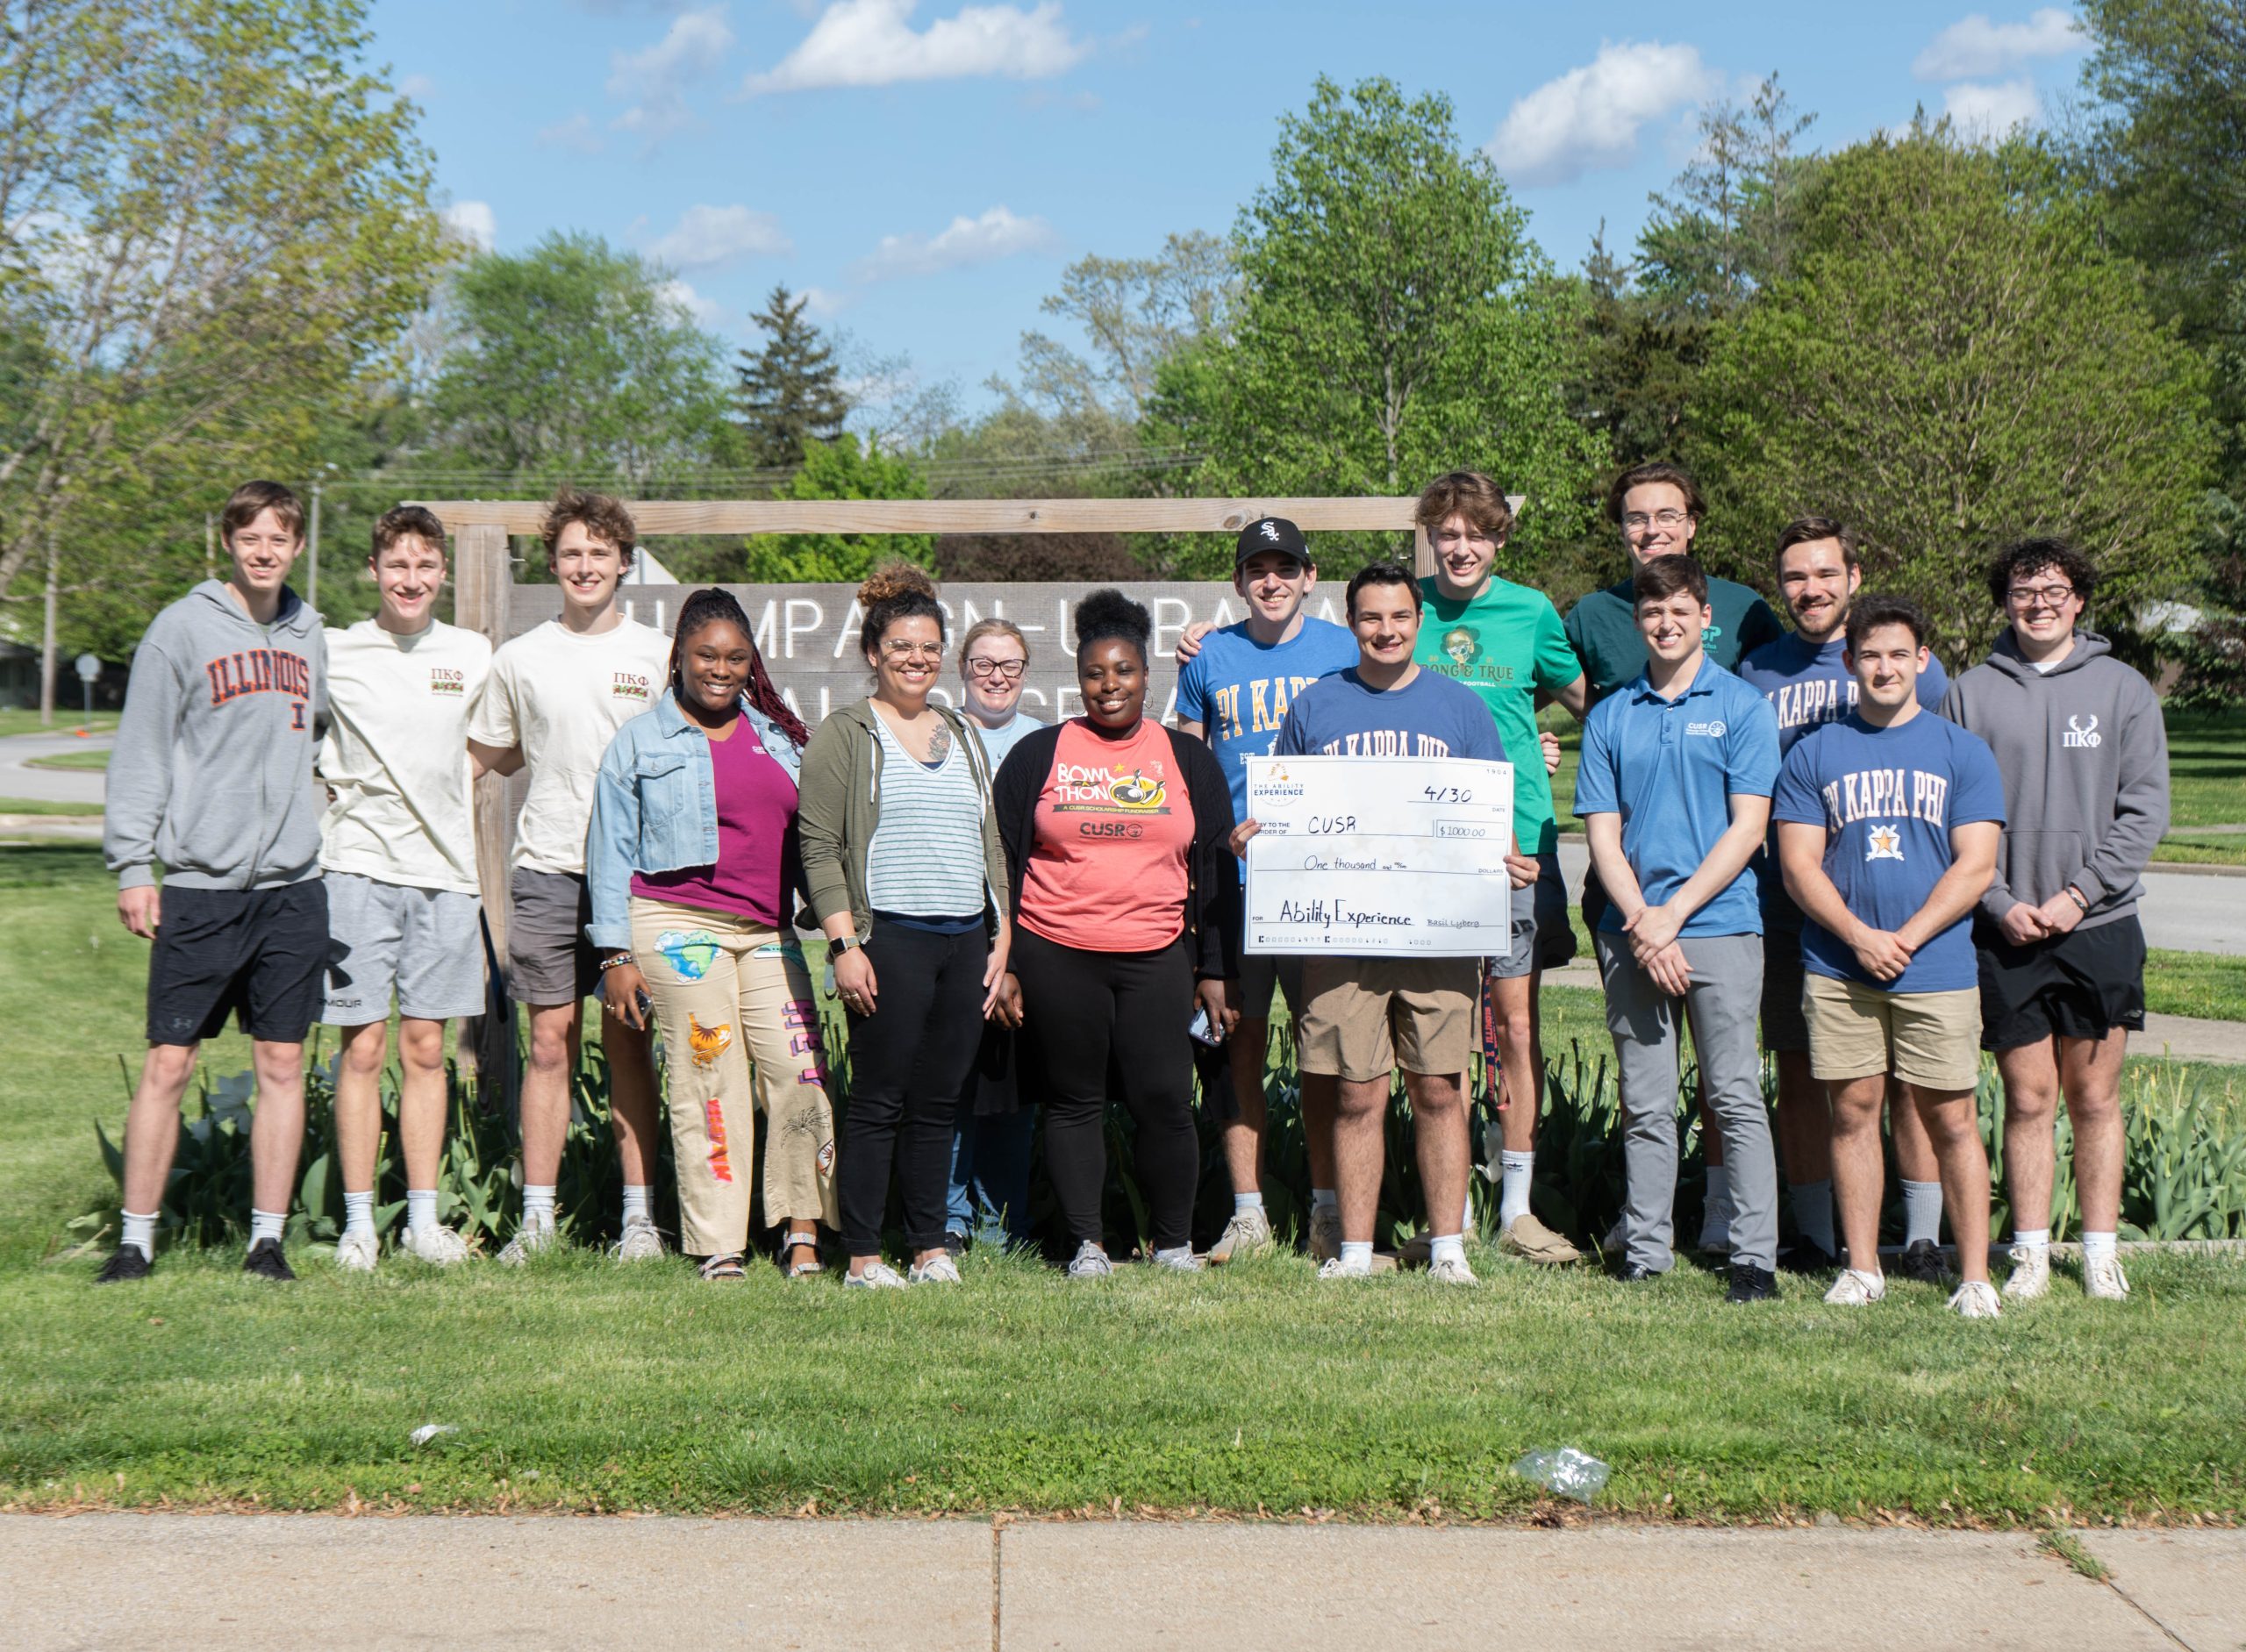 Group photo of CUSR staff and UIUC fraternity members holding check for $1,000